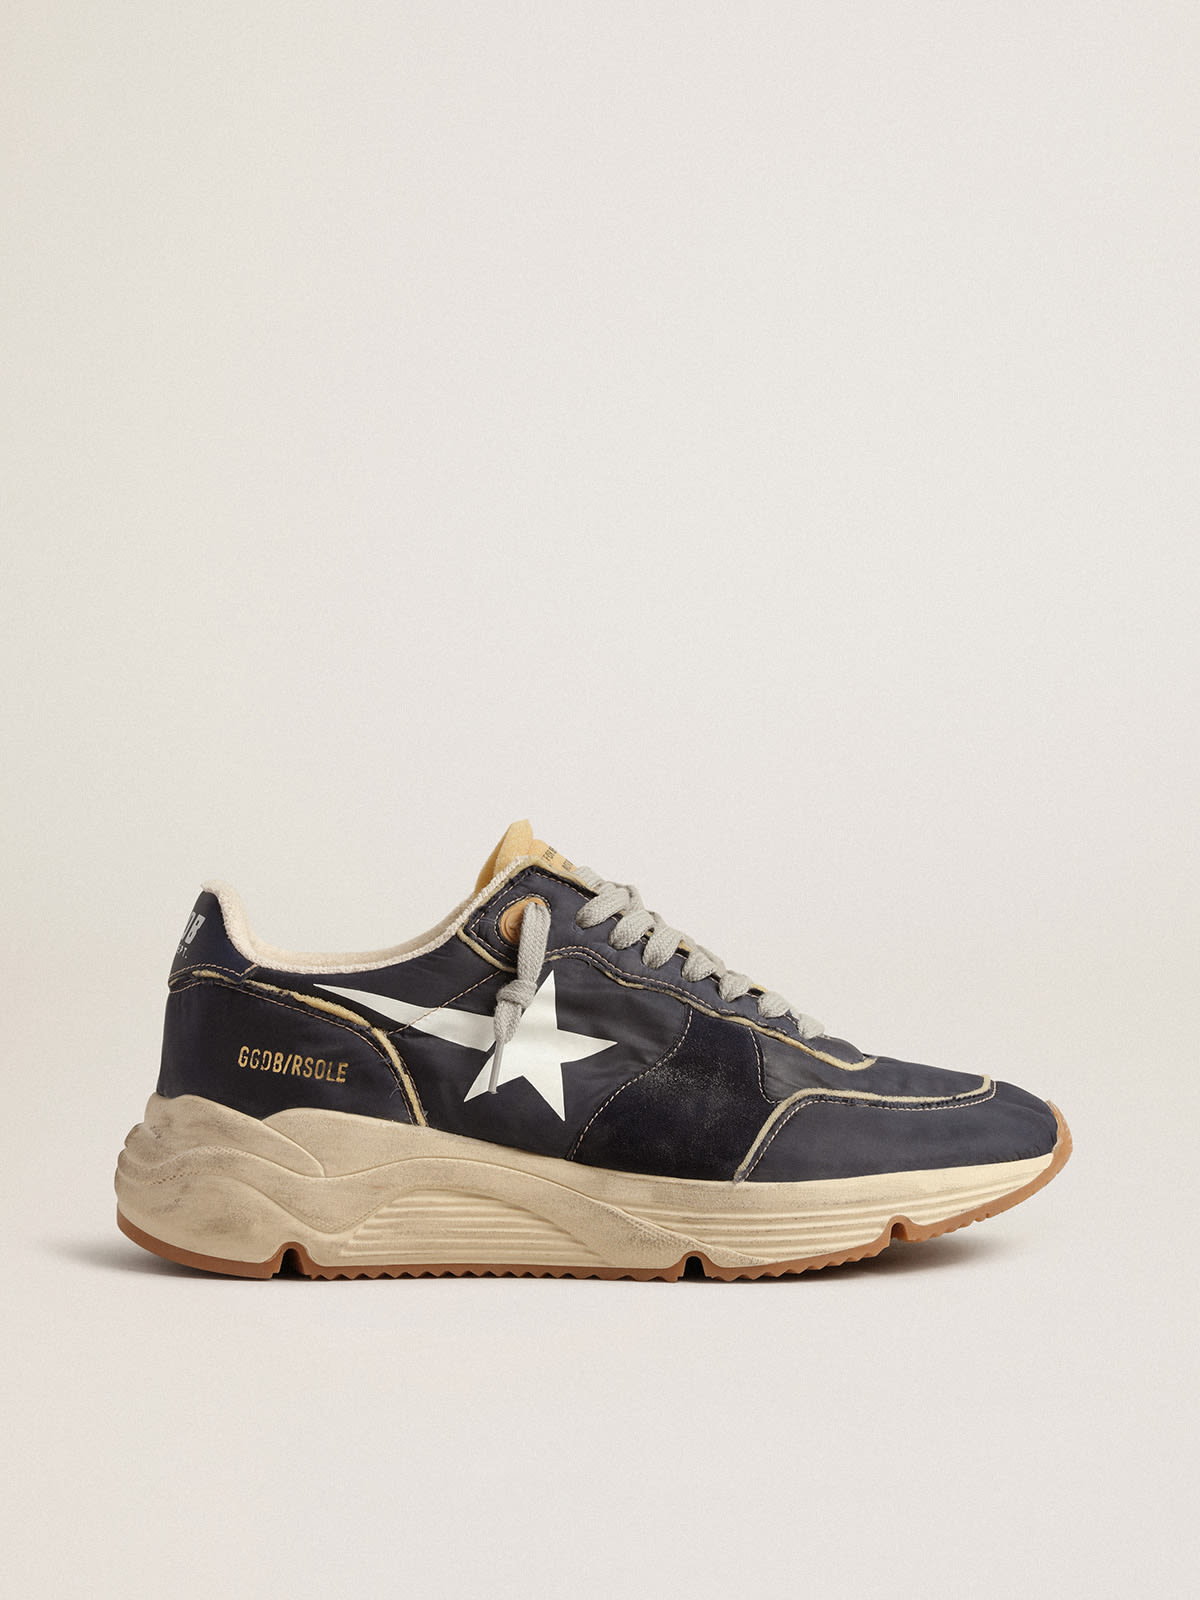 Golden Goose - Running Sole in blue nylon with white printed star in 